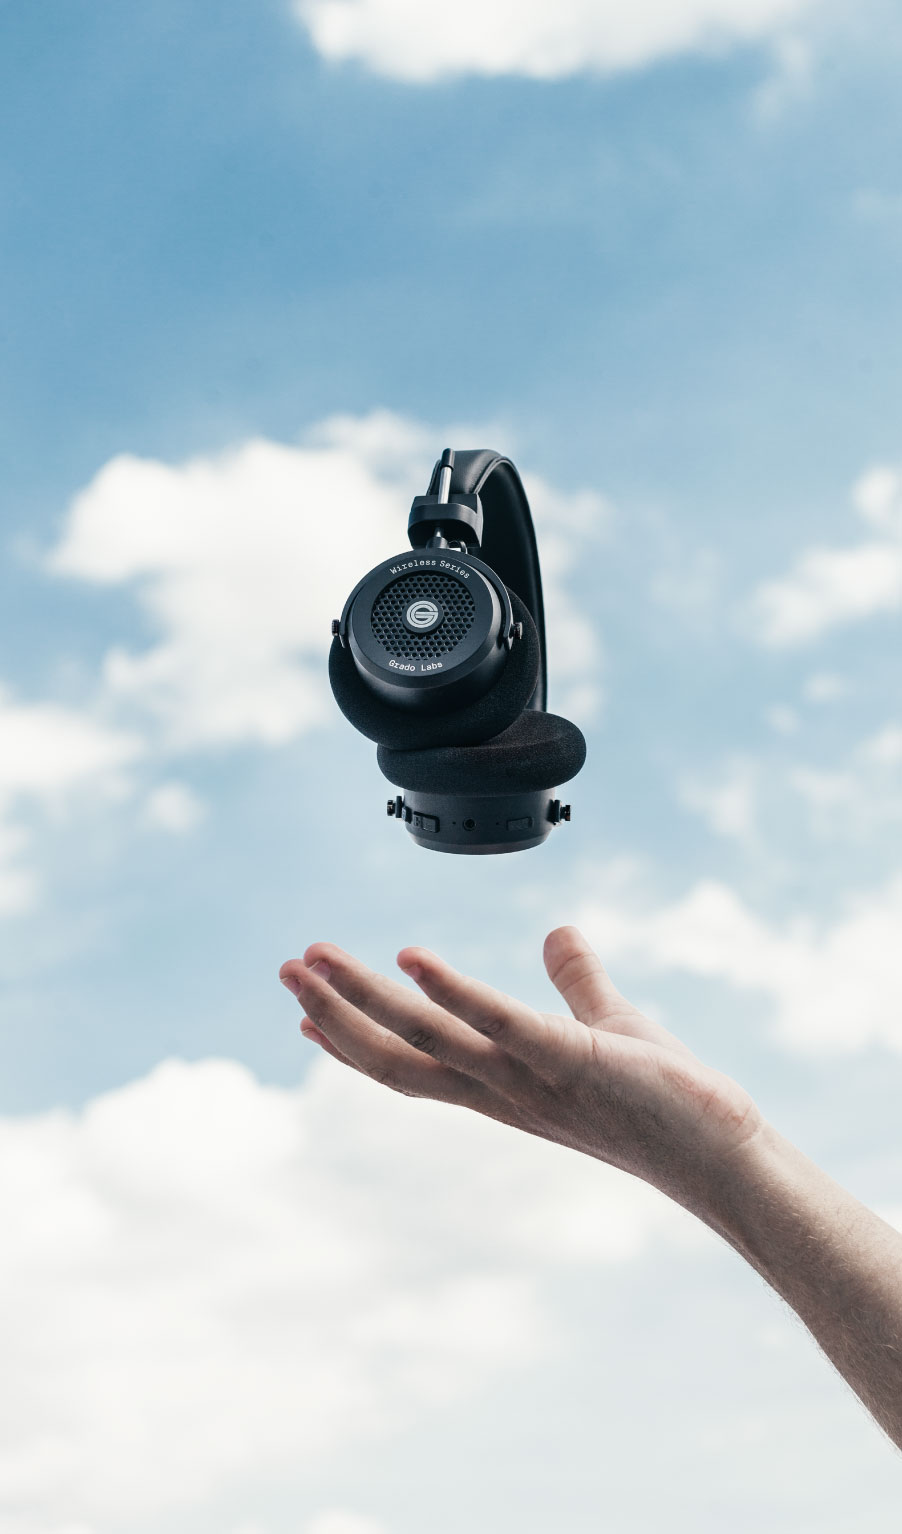 Photo of gw100 headphones levitating above a persons hand with a blue sky and clouds in the background